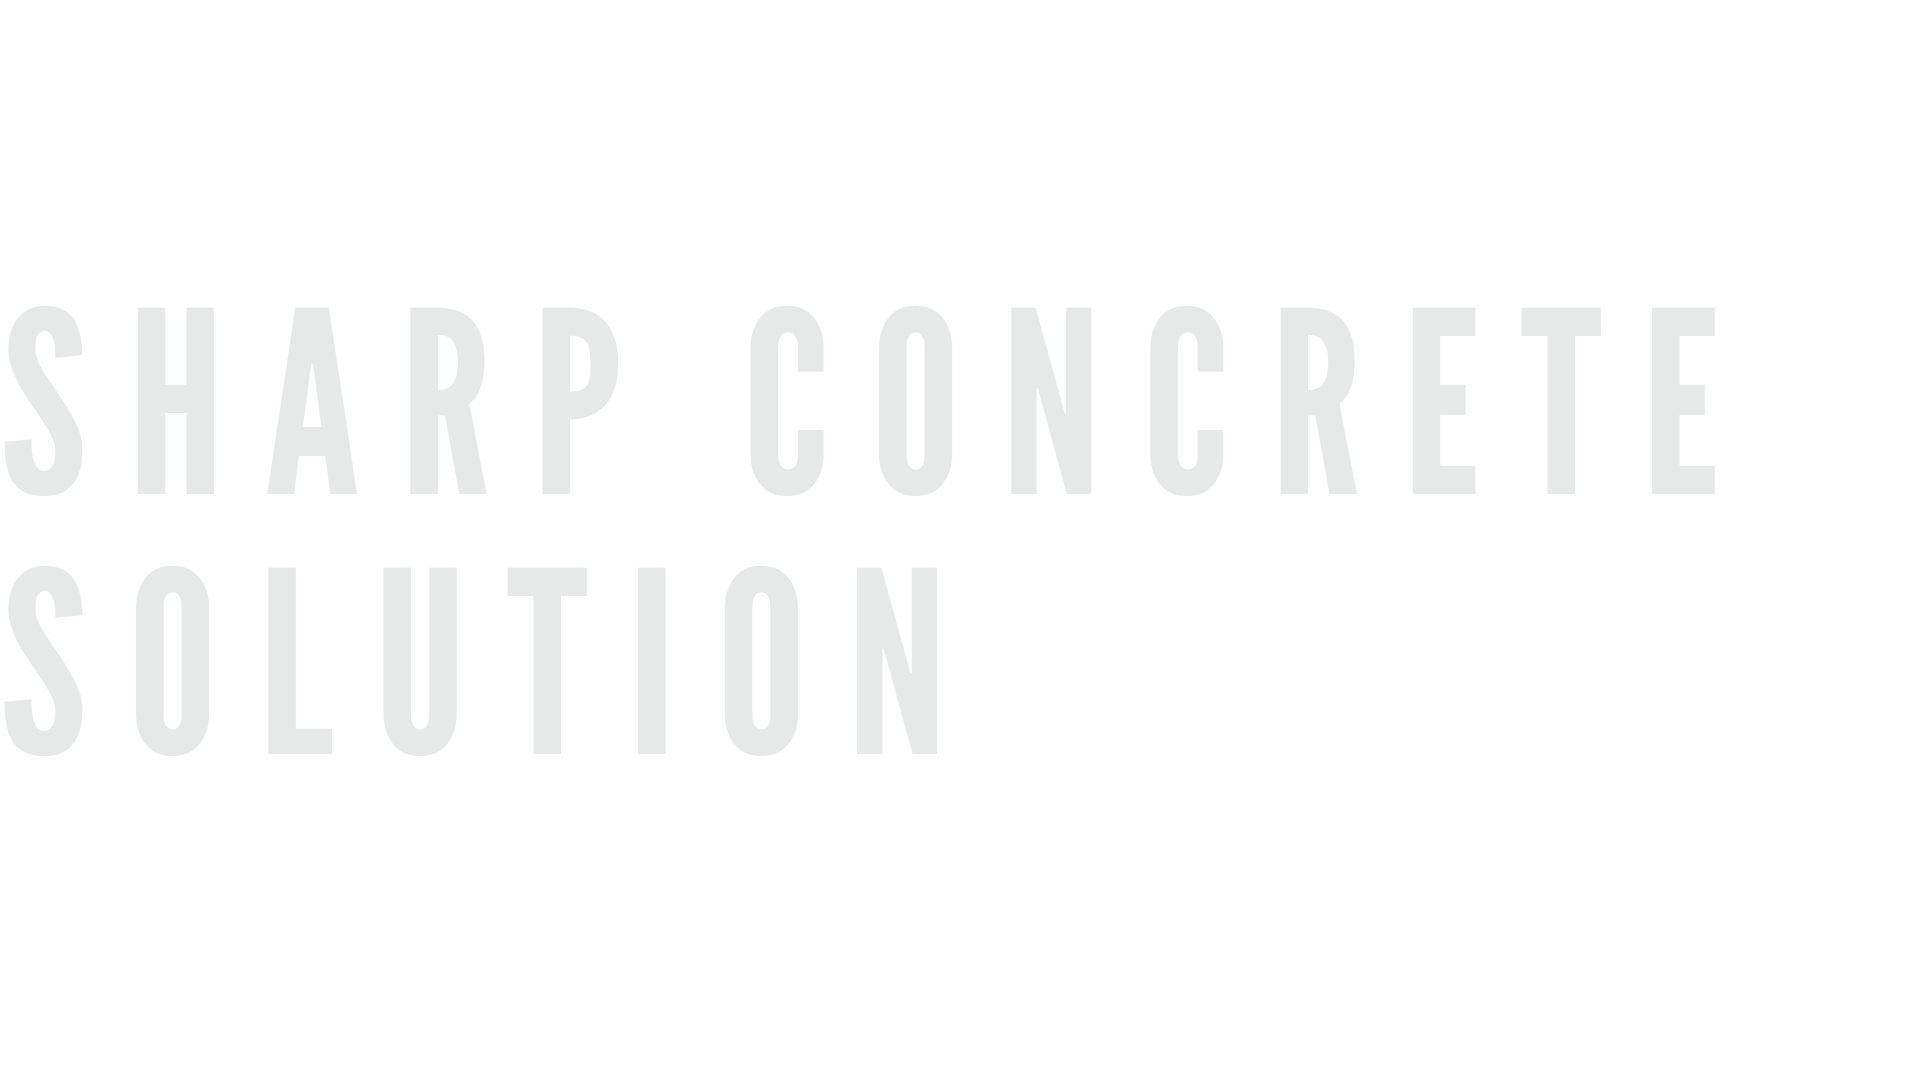 Sharp Concrete Solution is the best concrete services brand in Albury, NSW